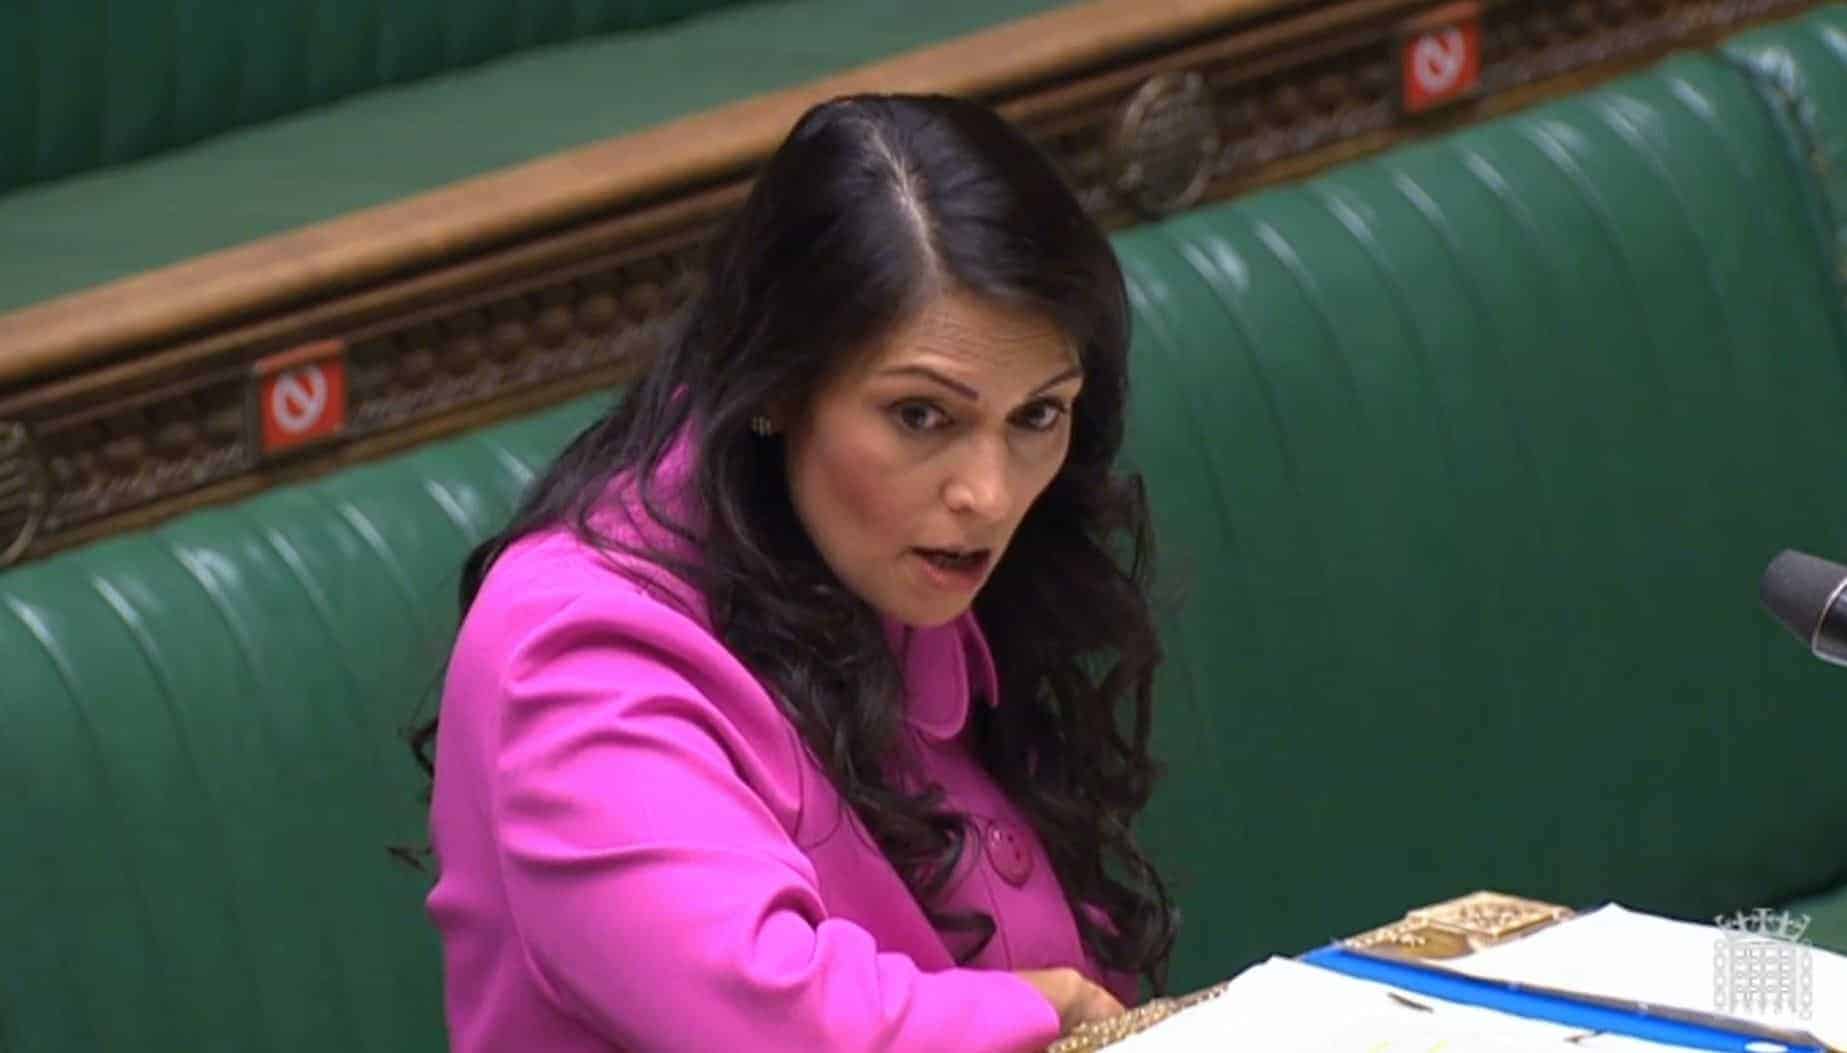 Claims Priti Patel will remove at least 1,000 Channel migrants from UK to mainland Europe